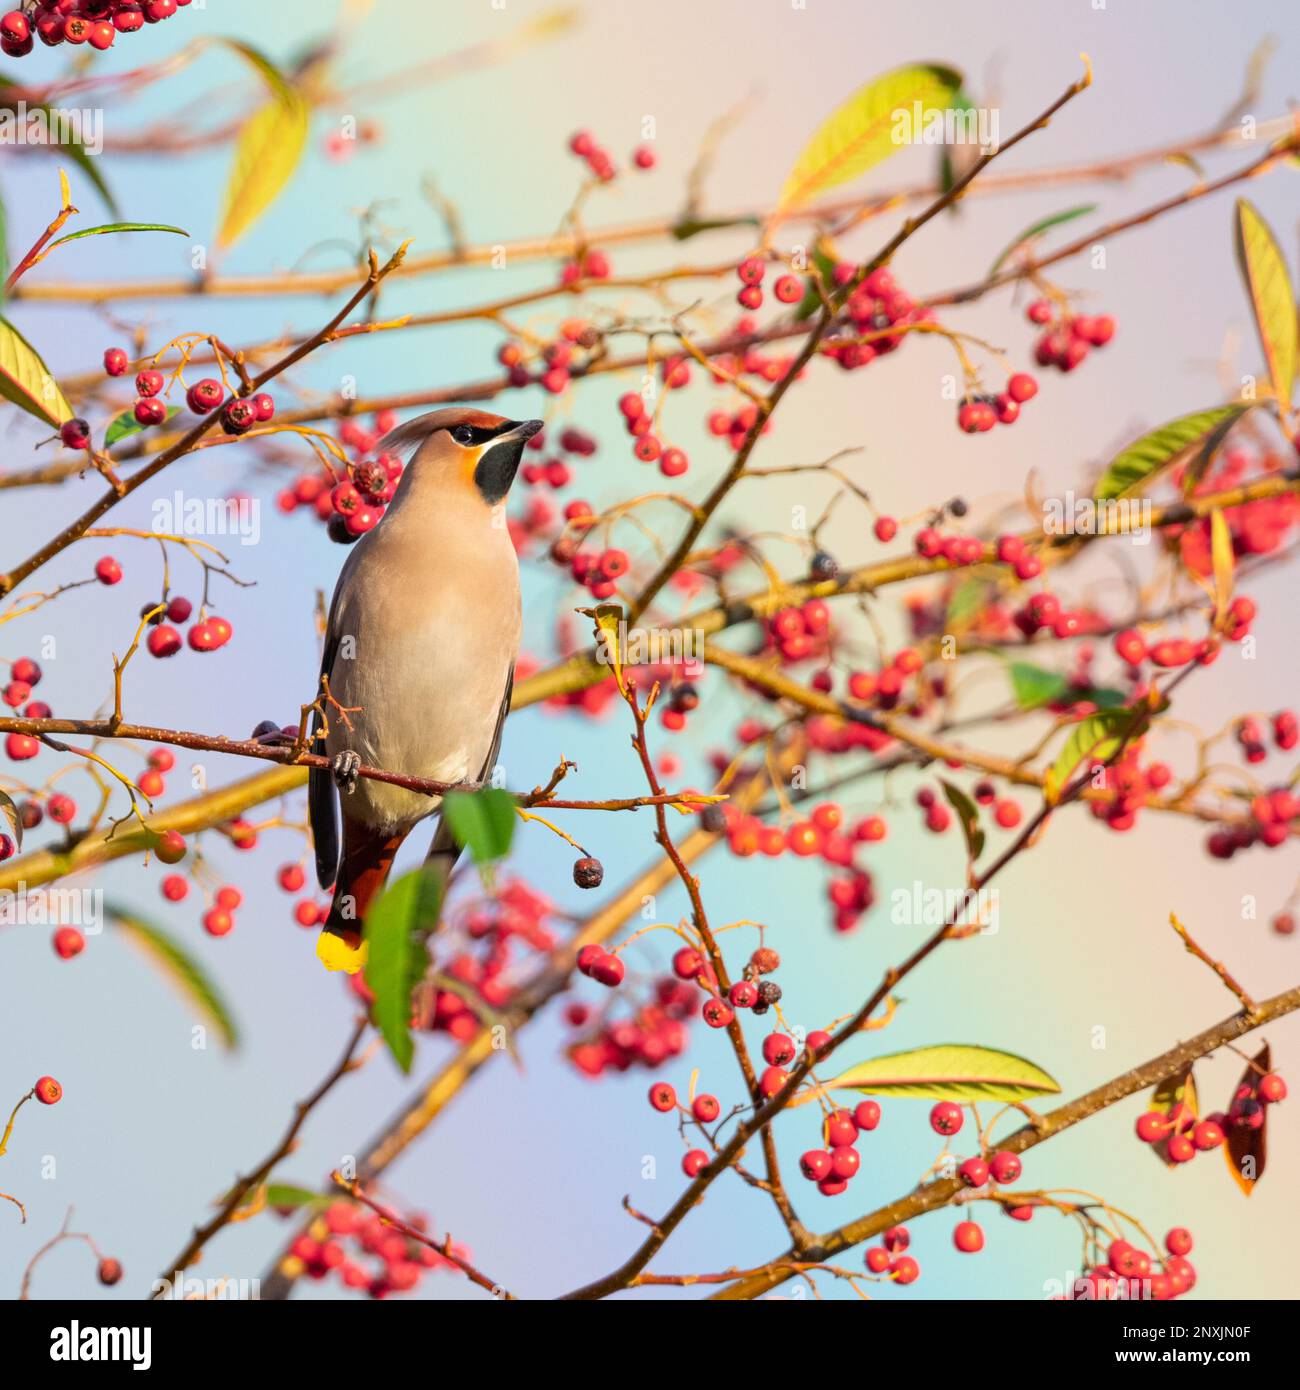 Waxwing bird perched on a berry bush in Bolton, UK, with a rainbow in the sky behind it. Square crop Stock Photo